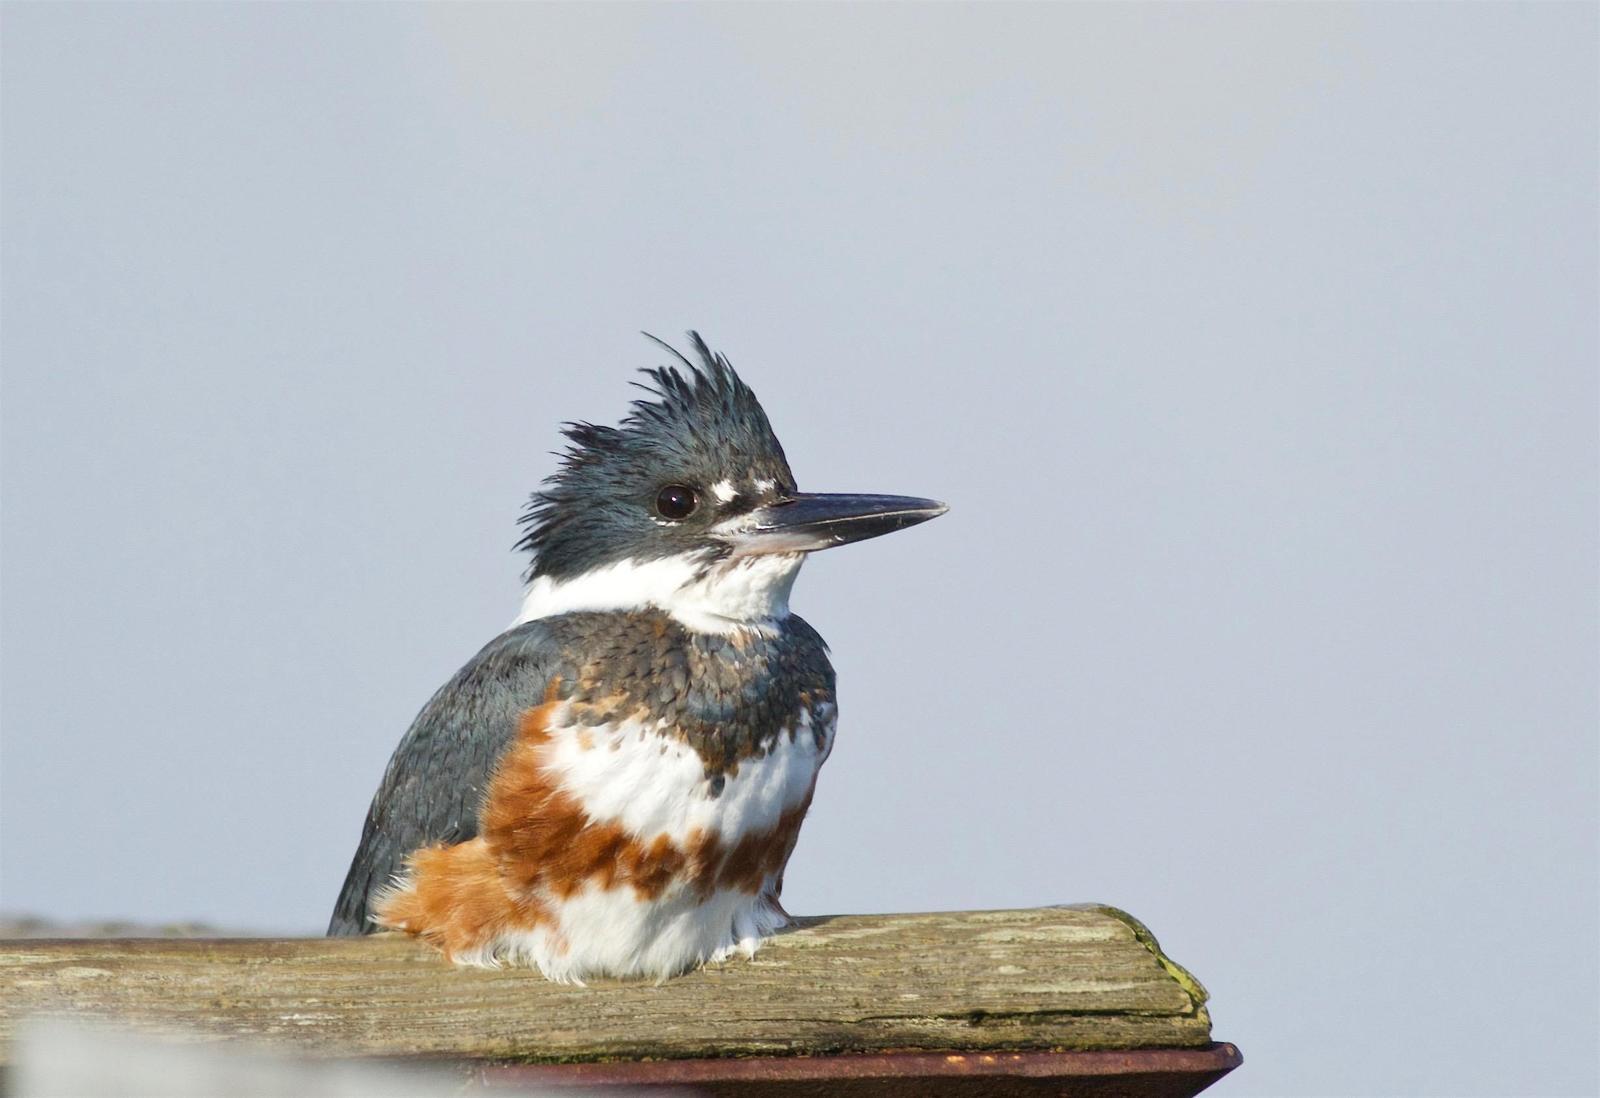 Belted Kingfisher Photo by Kathryn Keith